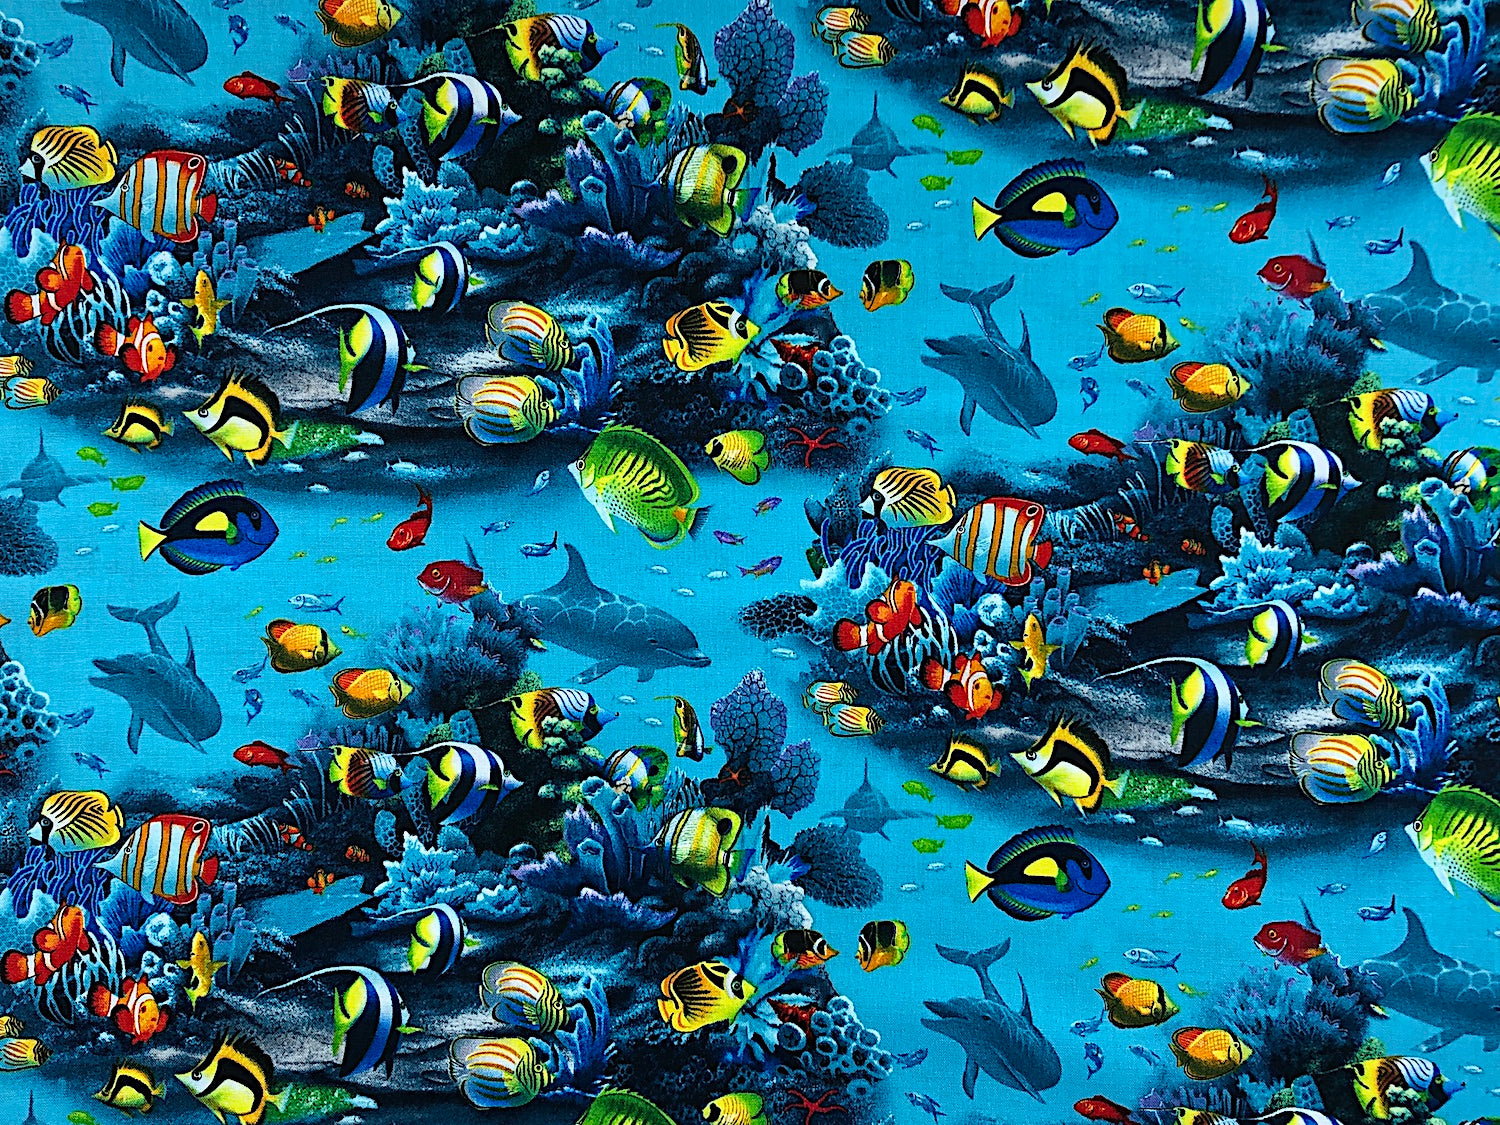 Blue cotton fabric covered with saltwater fish.